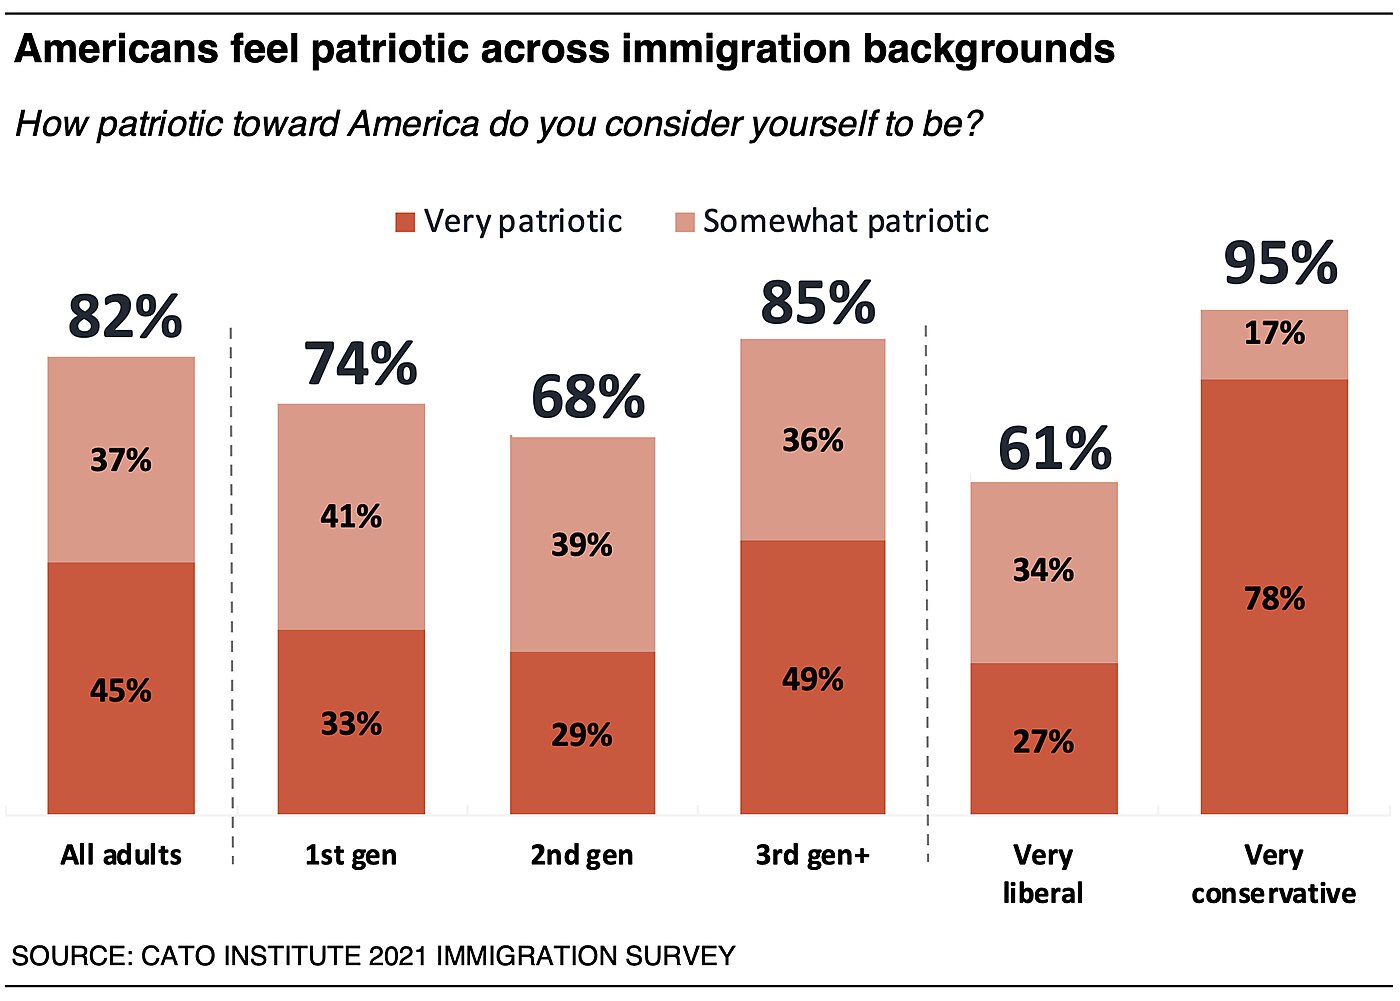 der atomar Andesbjergene E Pluribus Unum: Findings from the Cato Institute 2021 Immigration and  Identity National Survey | Cato Institute